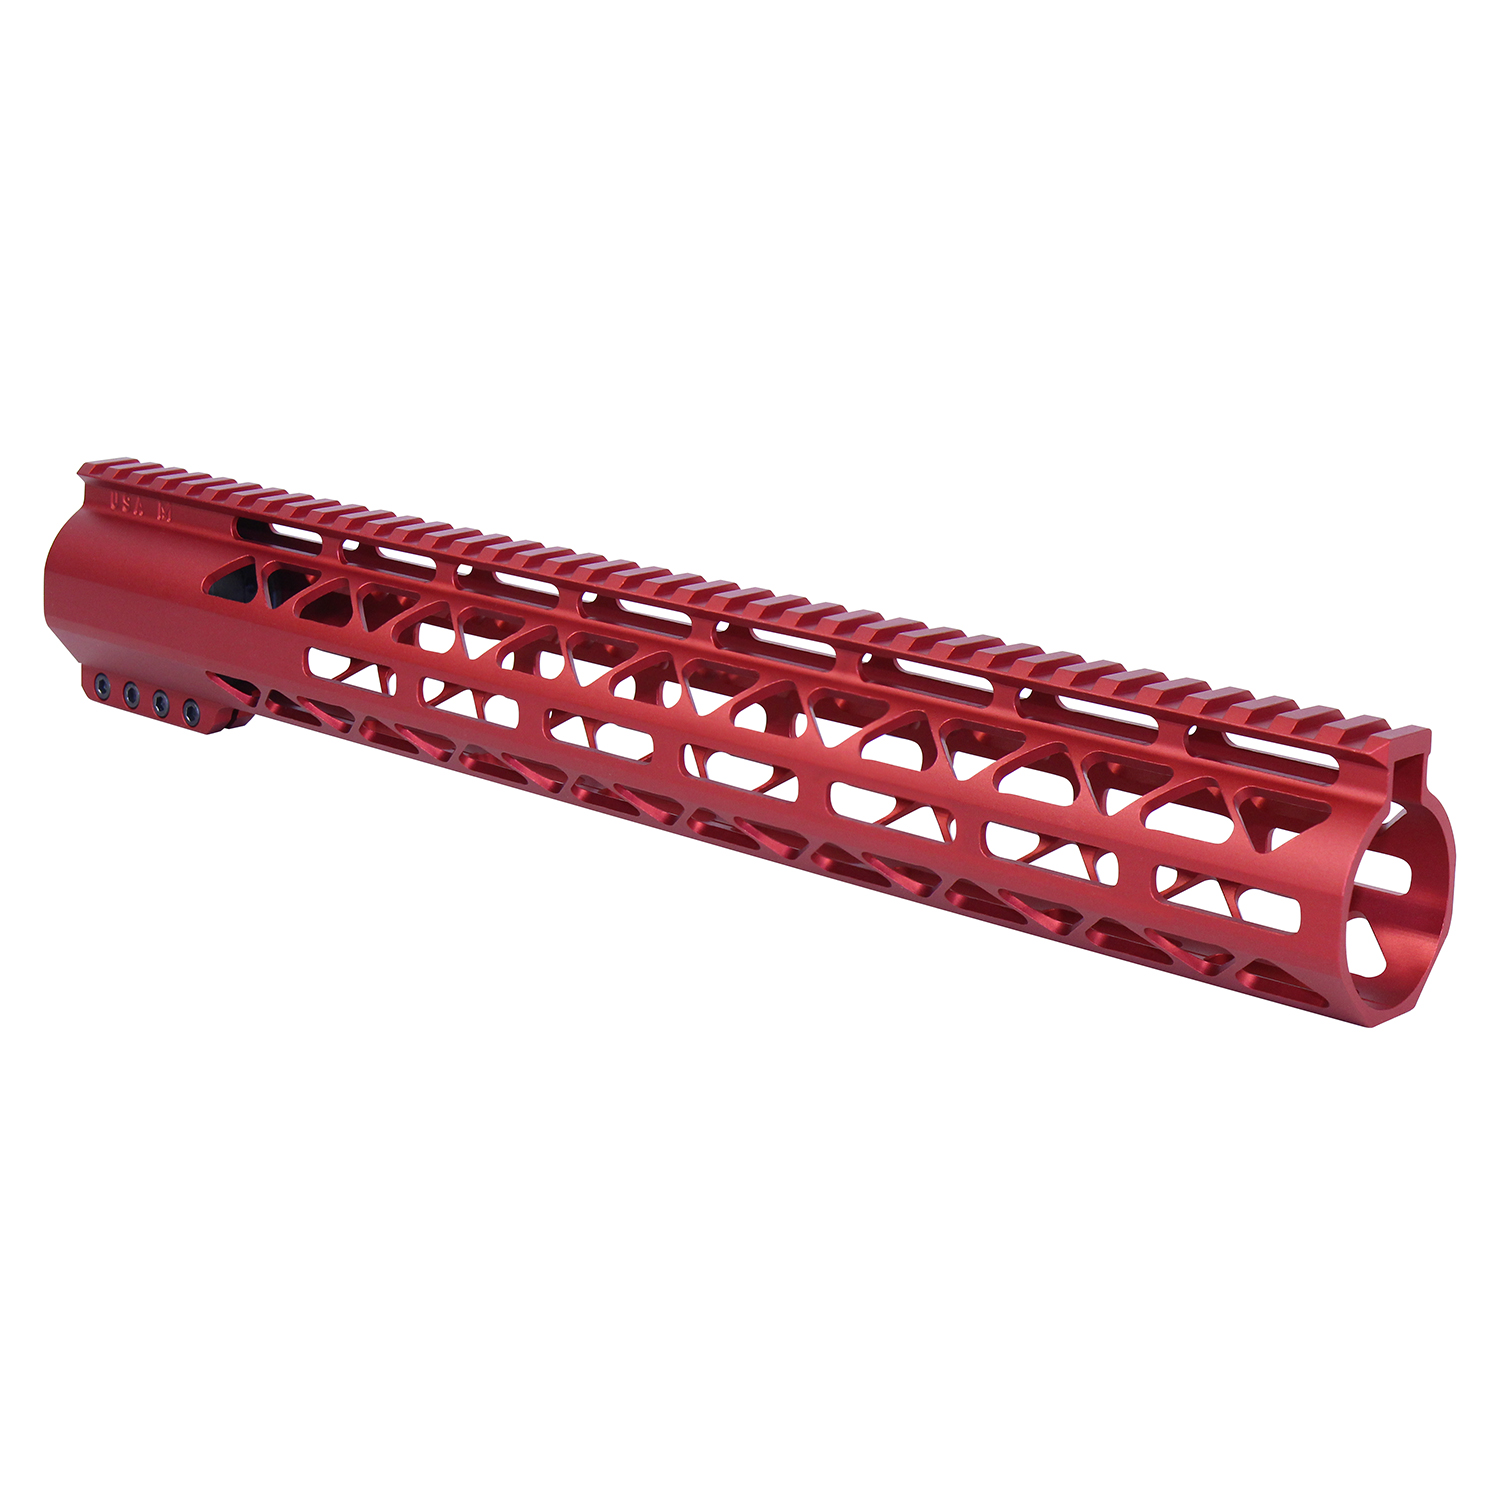 15" AIR-LOK Series M-LOK Compression Free Floating Handguard With Monolithic Top Rail (.308 Cal) (Anodized Red)